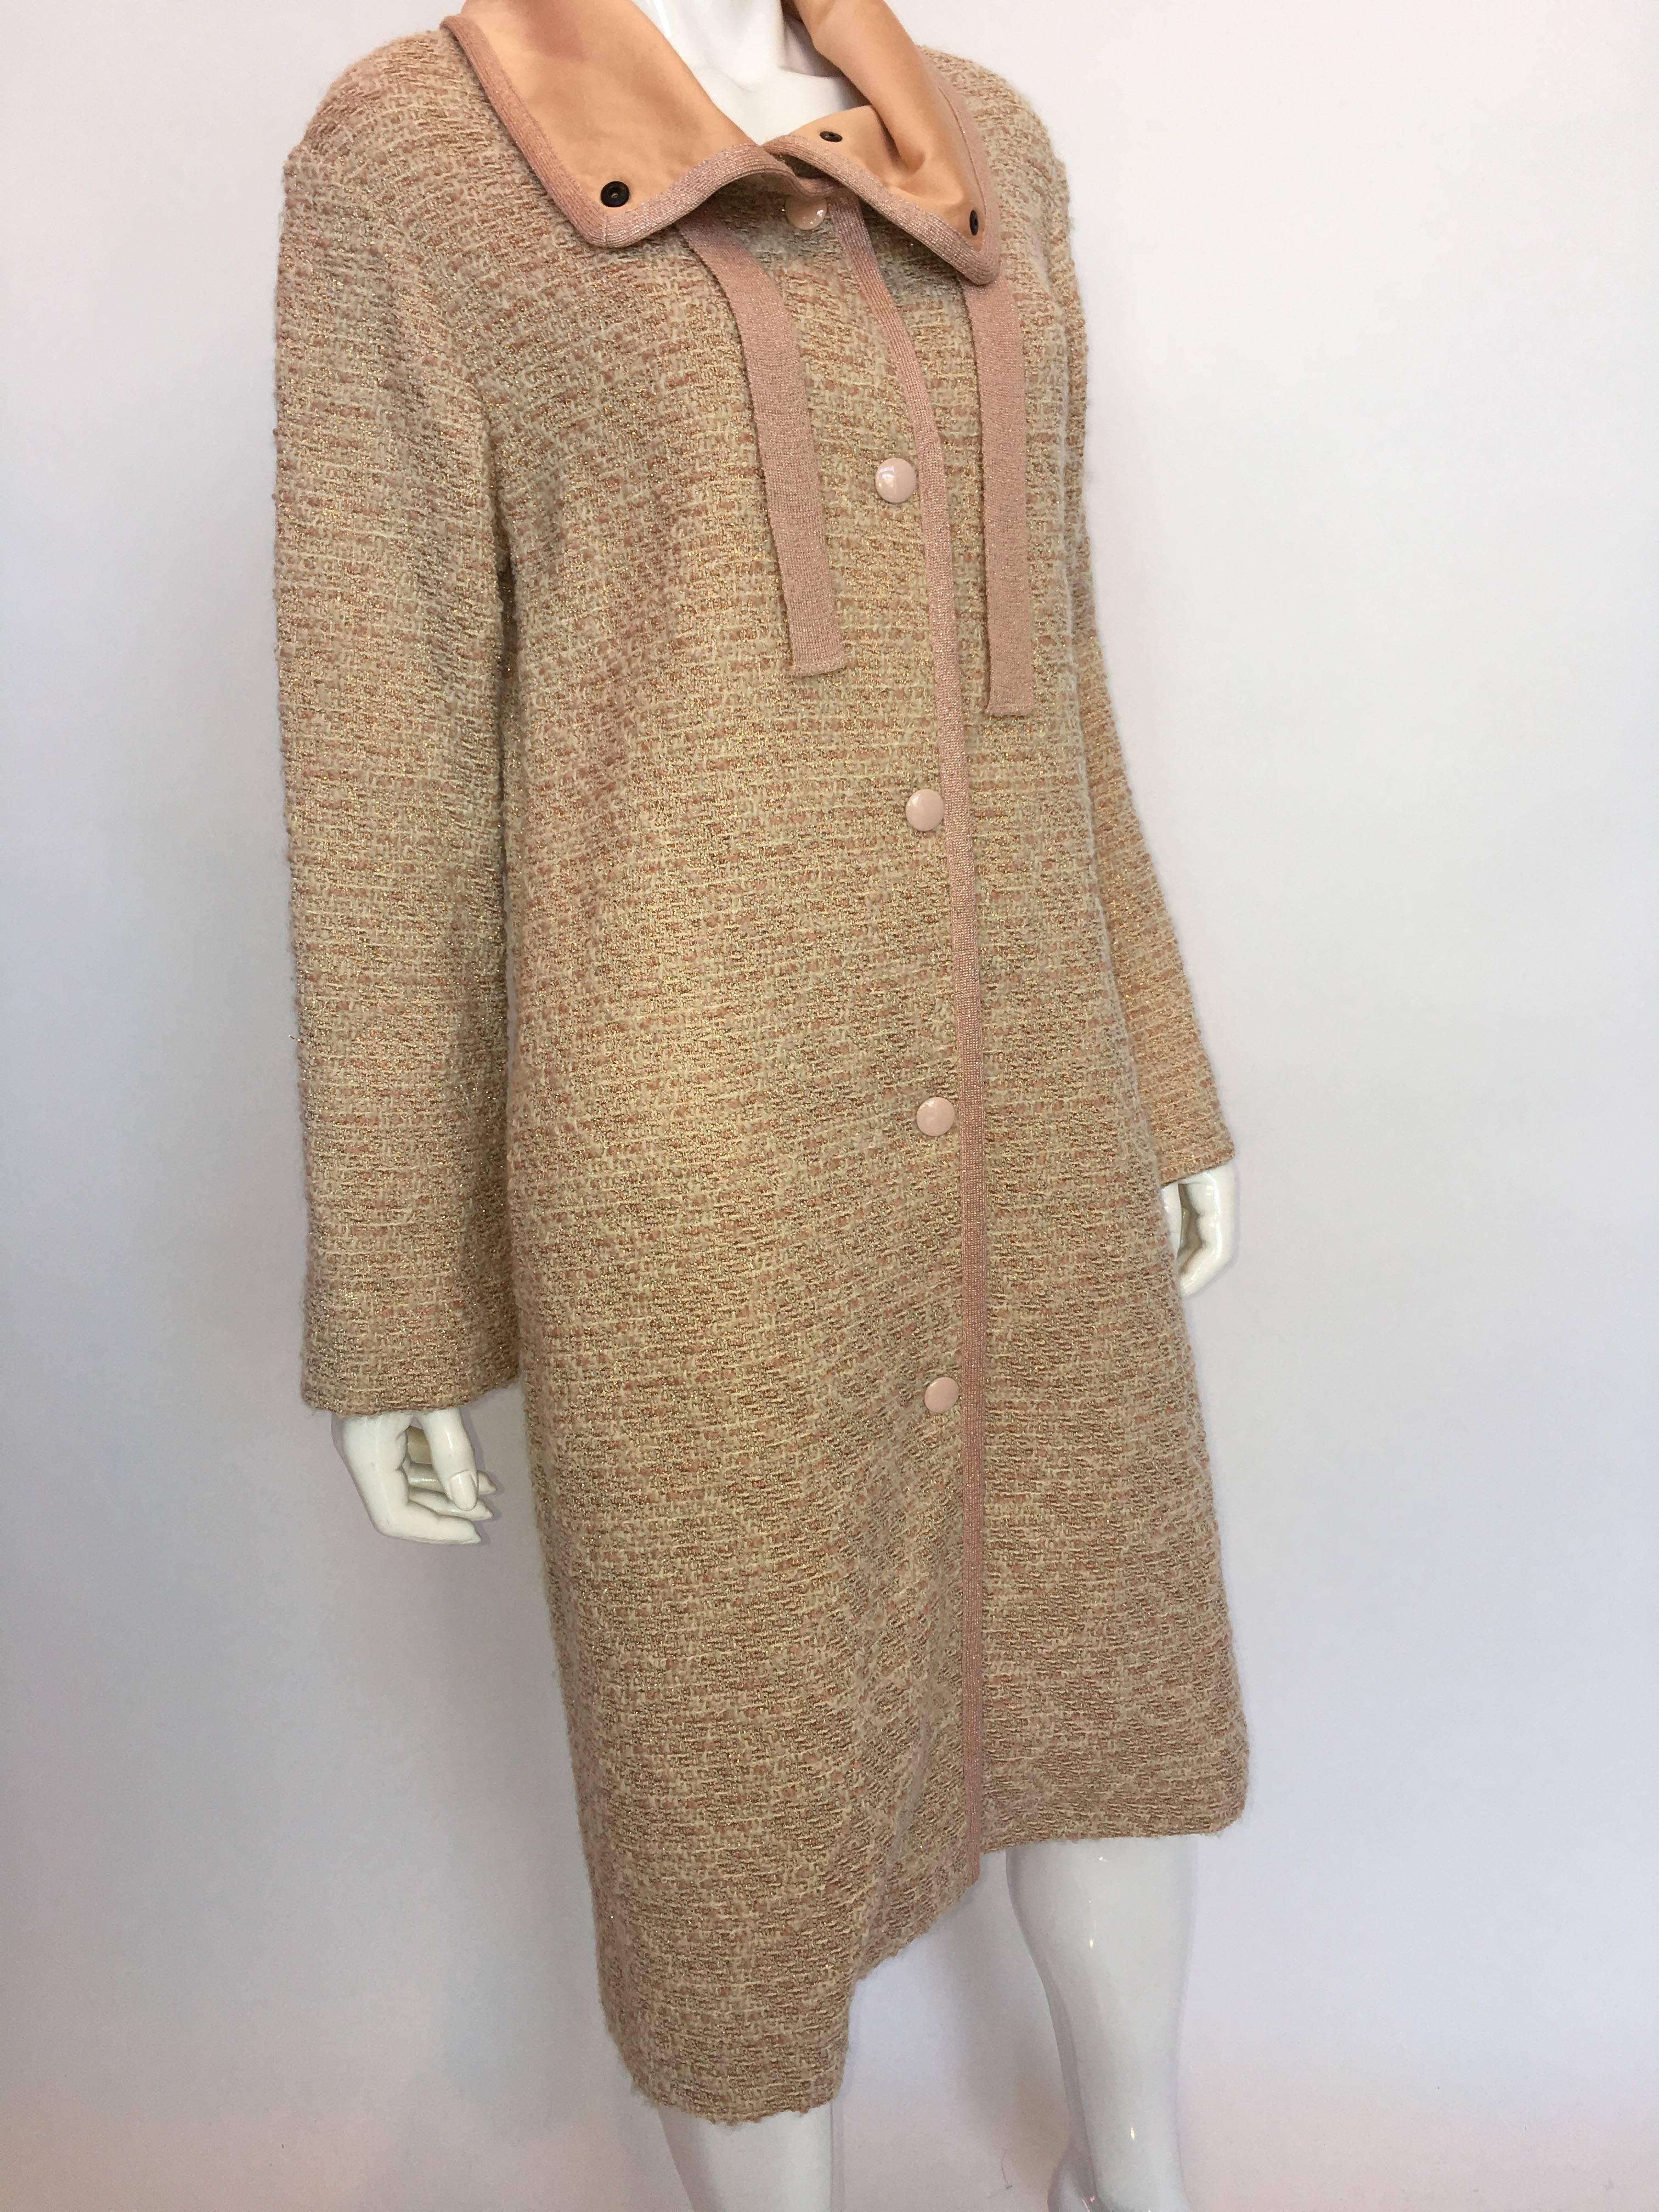 Missoni Wool Dusty Rose & Ivory Woven Jacket With Metallic Thread

Made in Italy 
Size label: US 12

Shoulders - seam to seam: 19